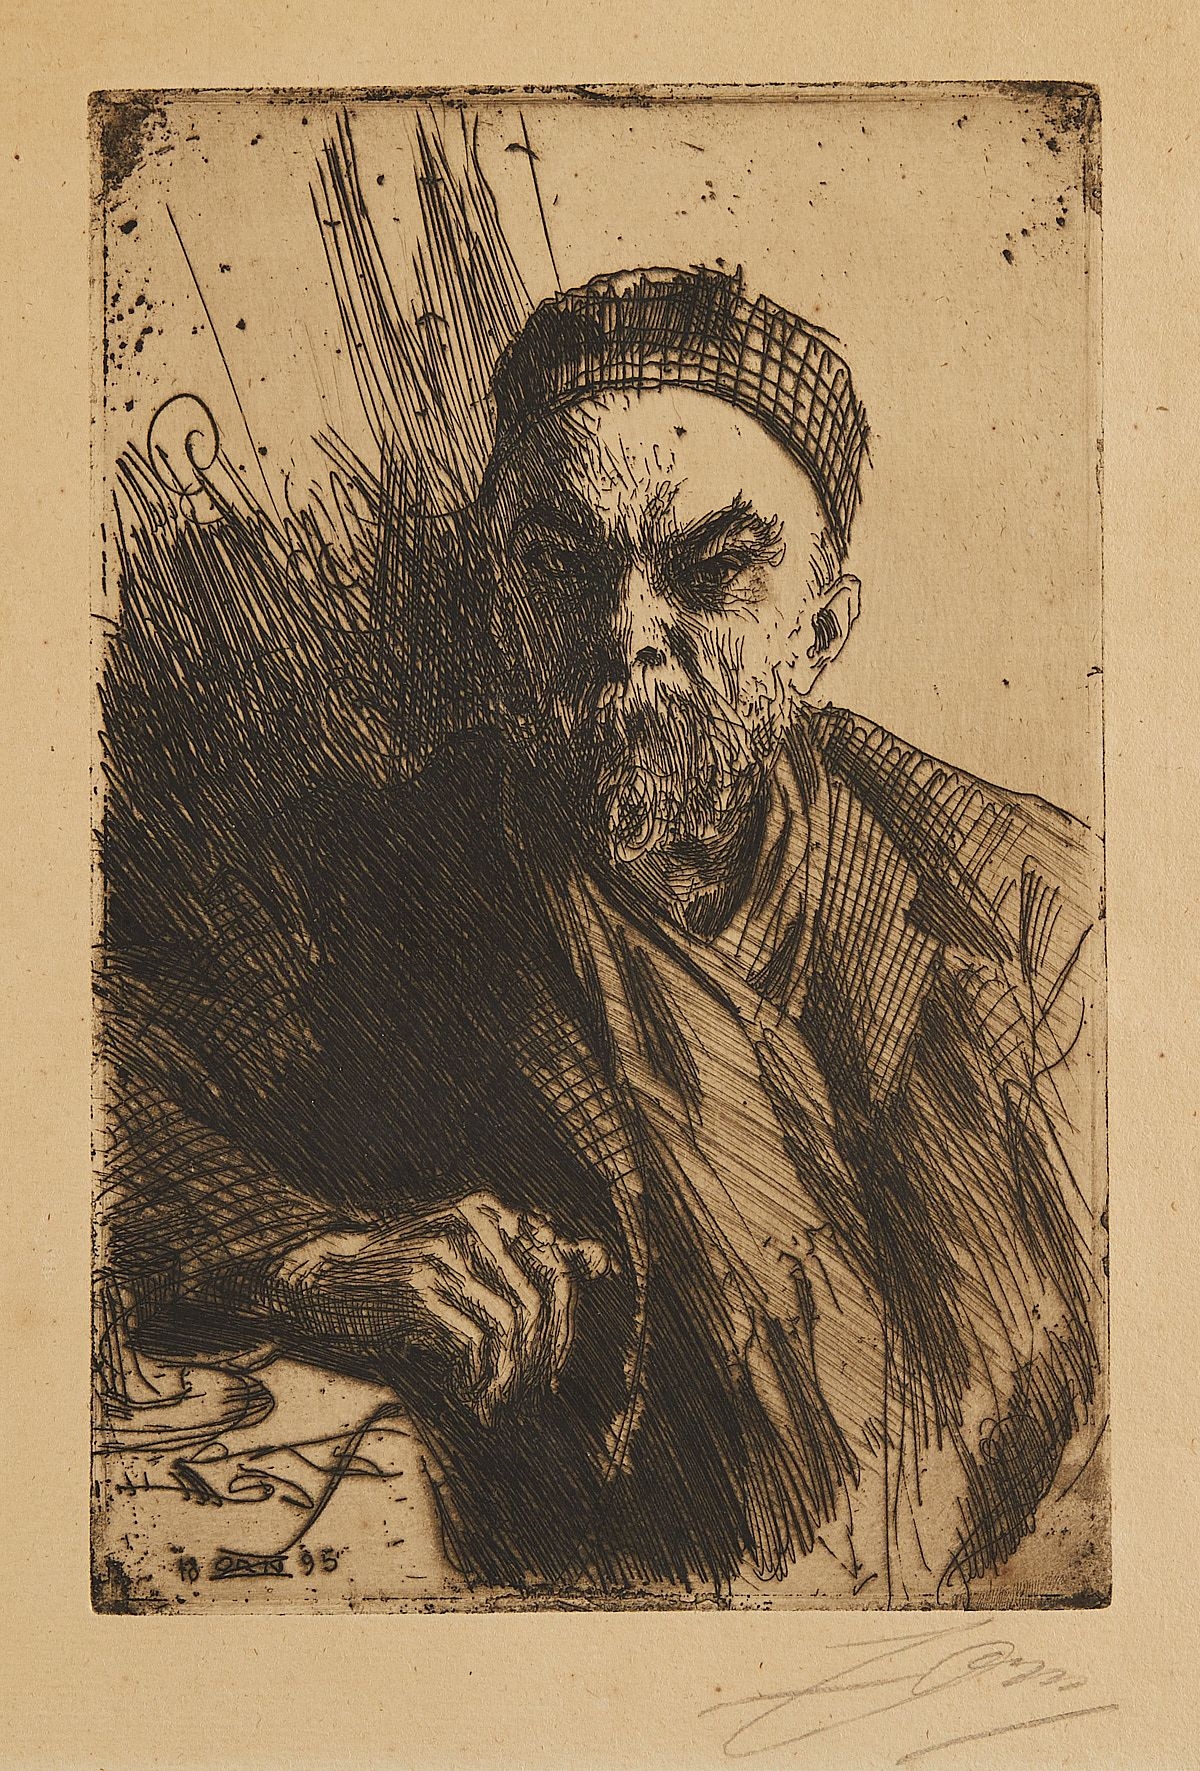 Artwork by Paul Verlaine, "Paul Verlaine", Made of Etching on paper